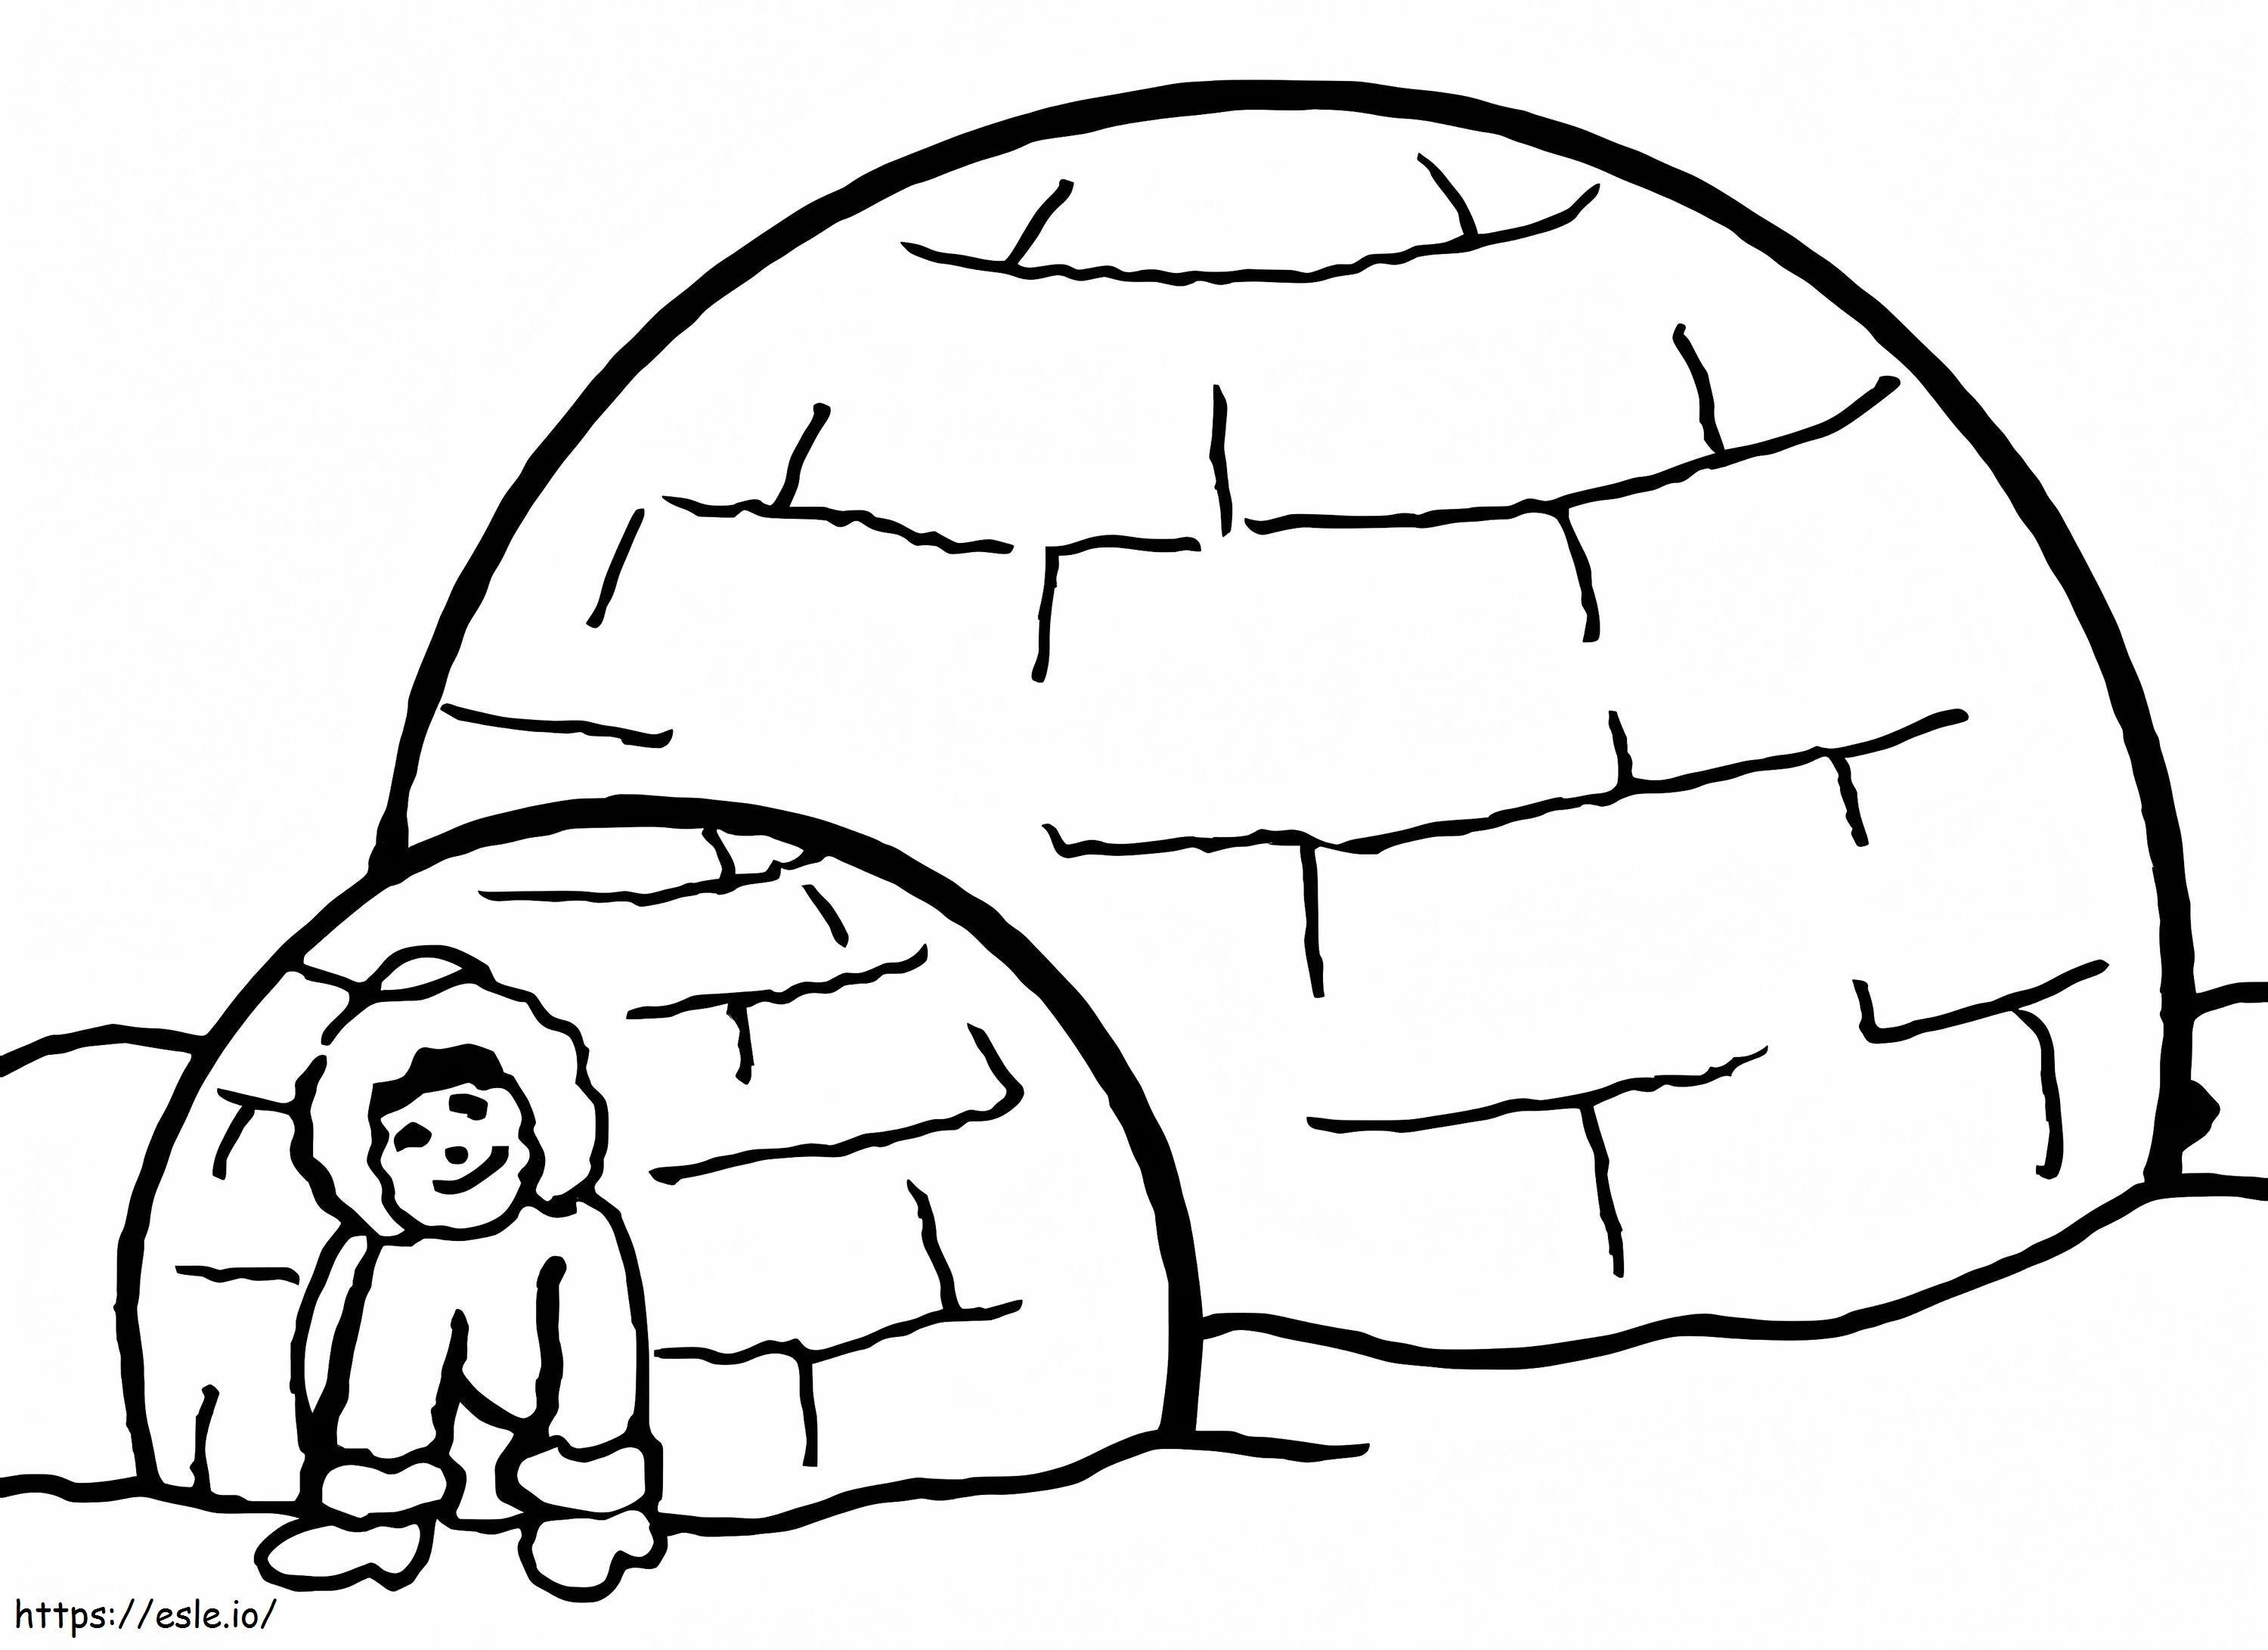 He Entered The Igloo coloring page